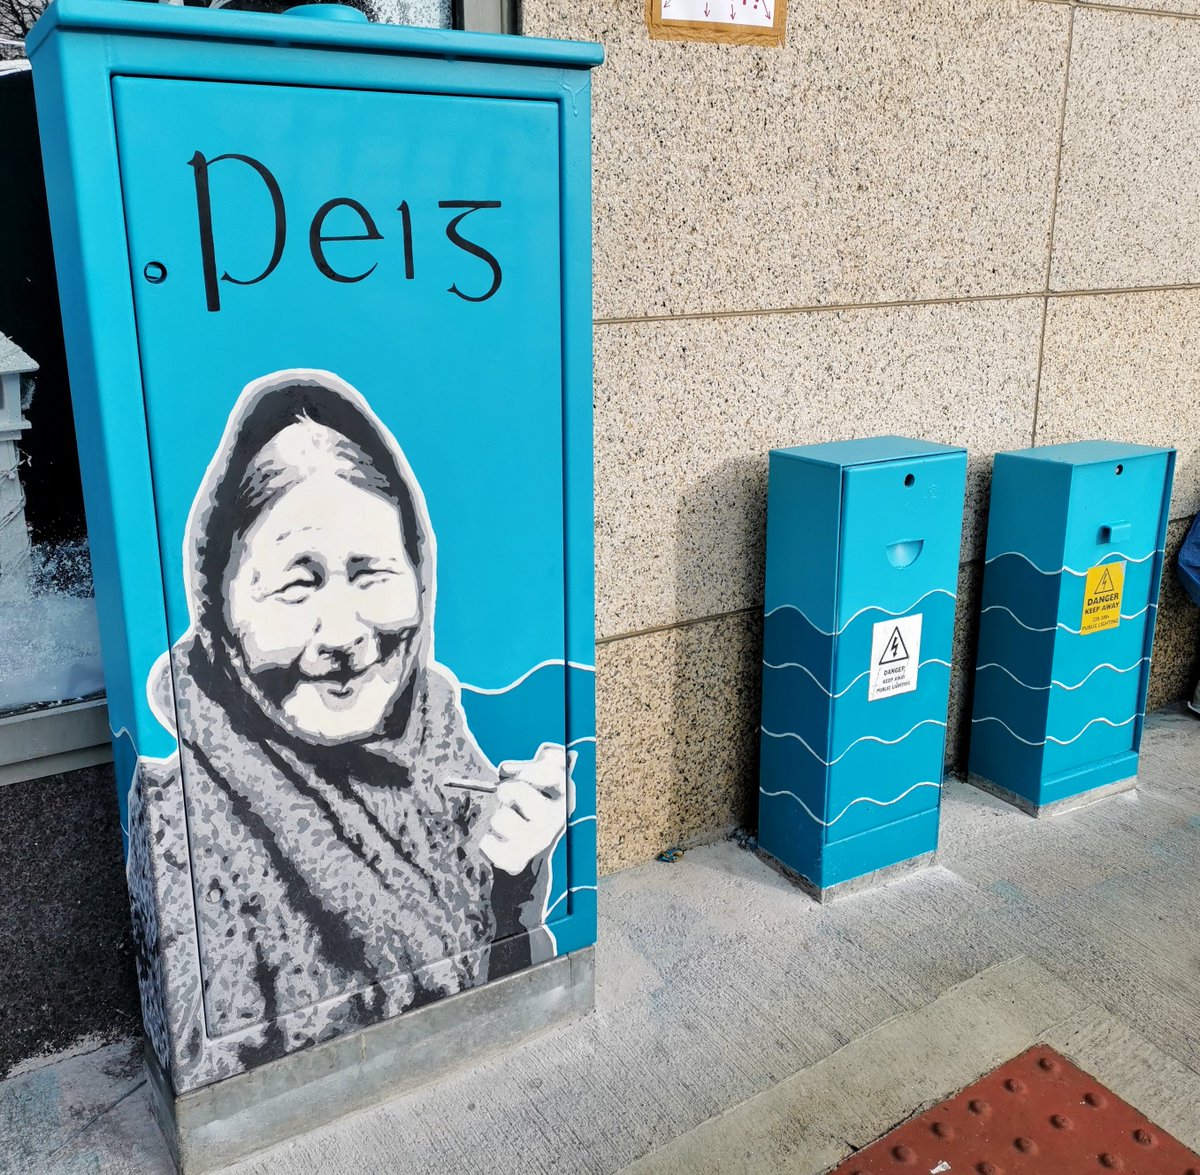 Painted some proPeiganda in Tralee